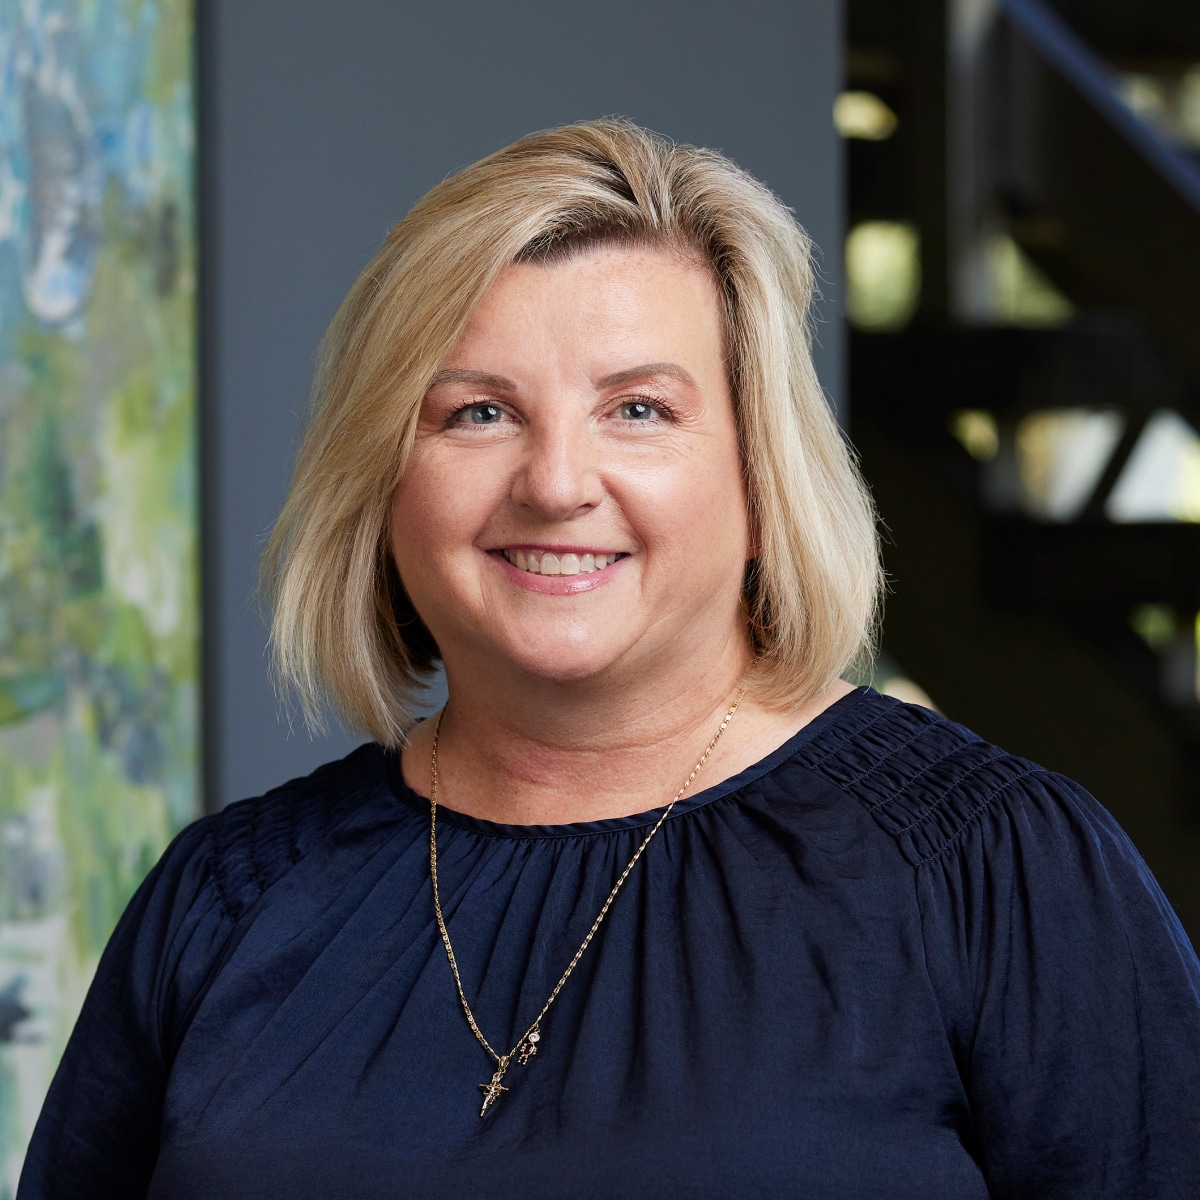 An image of Kim Smith BA, CFP, Wealth Management at Ford Keast LLP